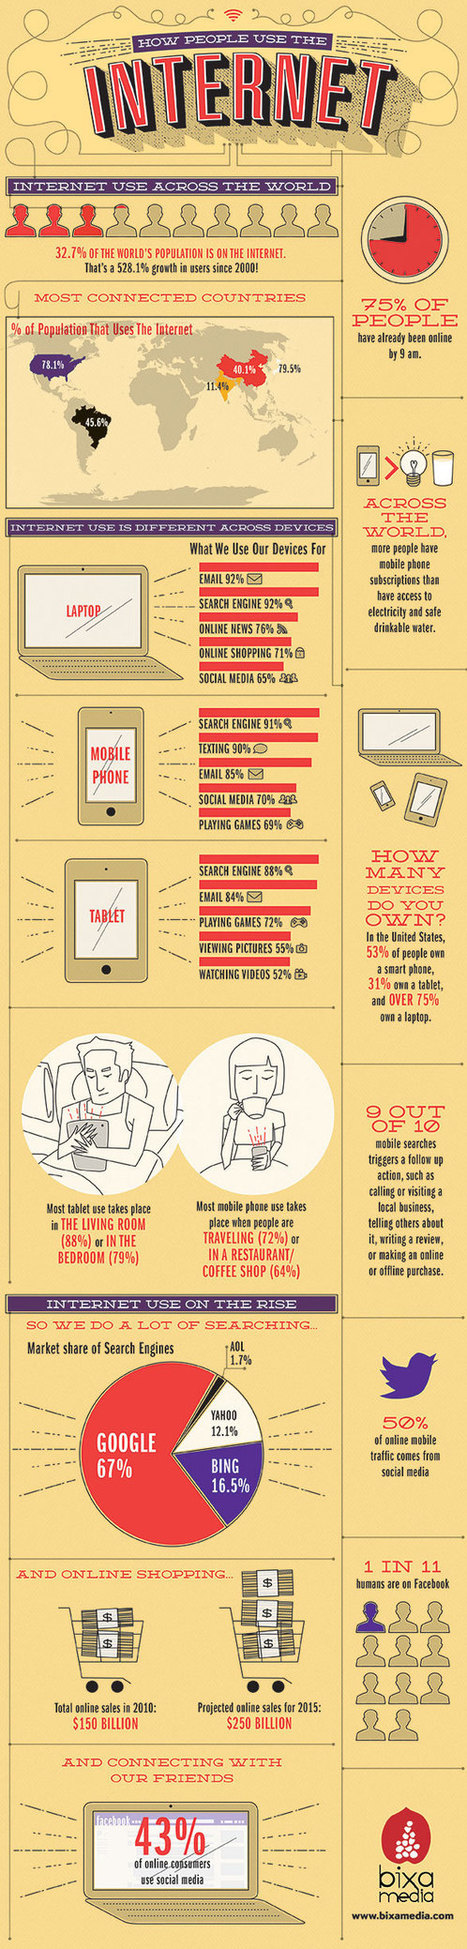 How People Use the Internet [INFOGRAPHIC] | Latest Social Media News | Scoop.it